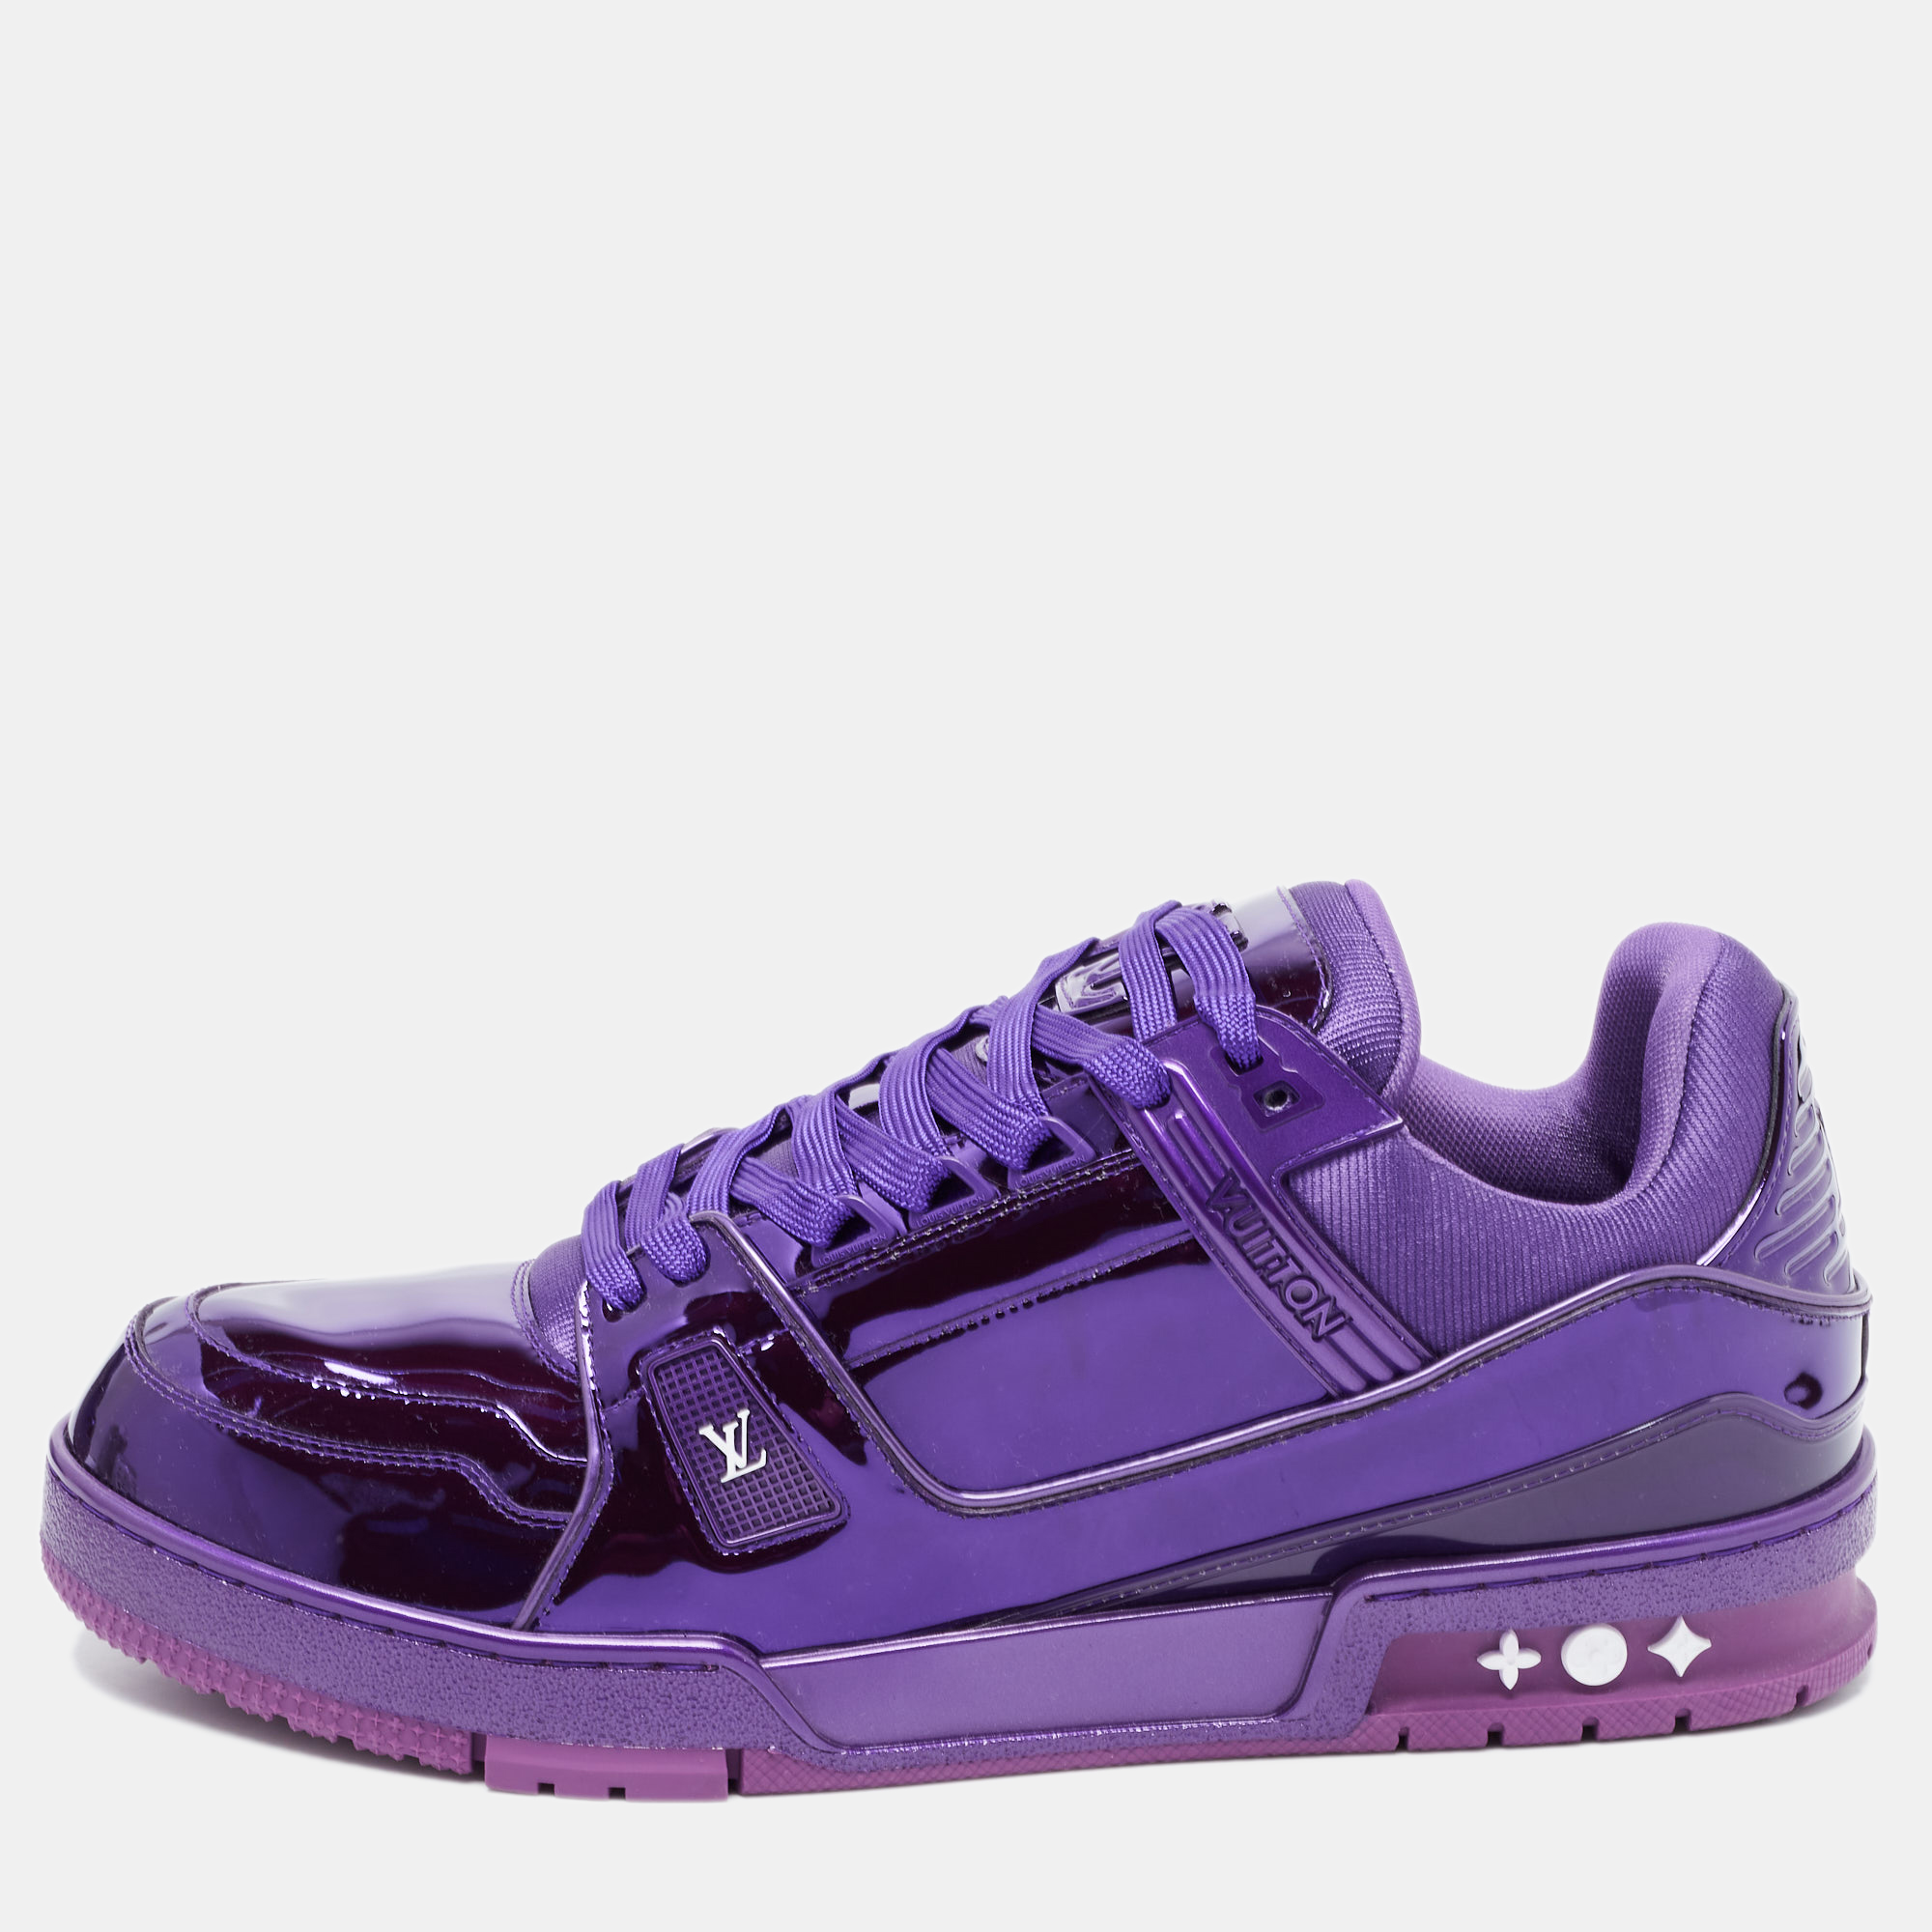 Lv trainer patent leather low trainers Louis Vuitton Purple size 7 UK in  Patent leather - 34589541